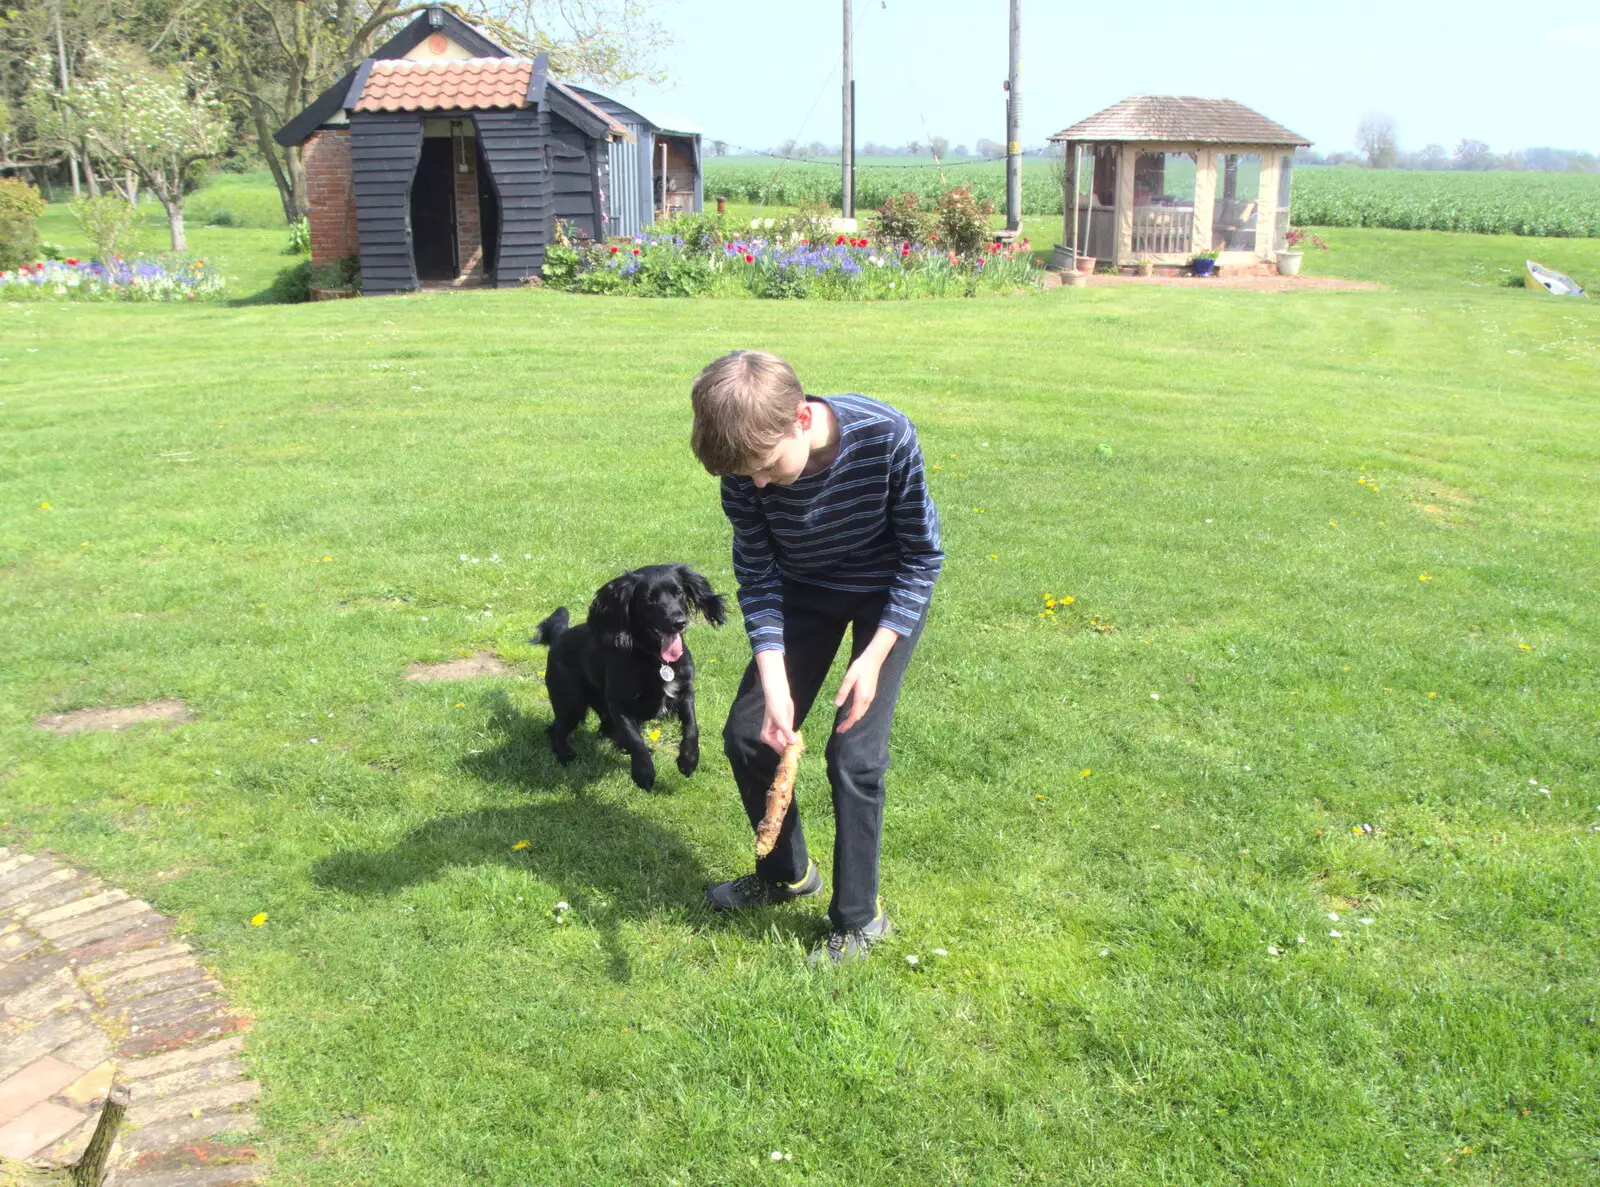 Over at Chickens', Harry plays with Pepper the dog, from Pizza at the Village Hall, Brome, Suffolk - 30th April 2023